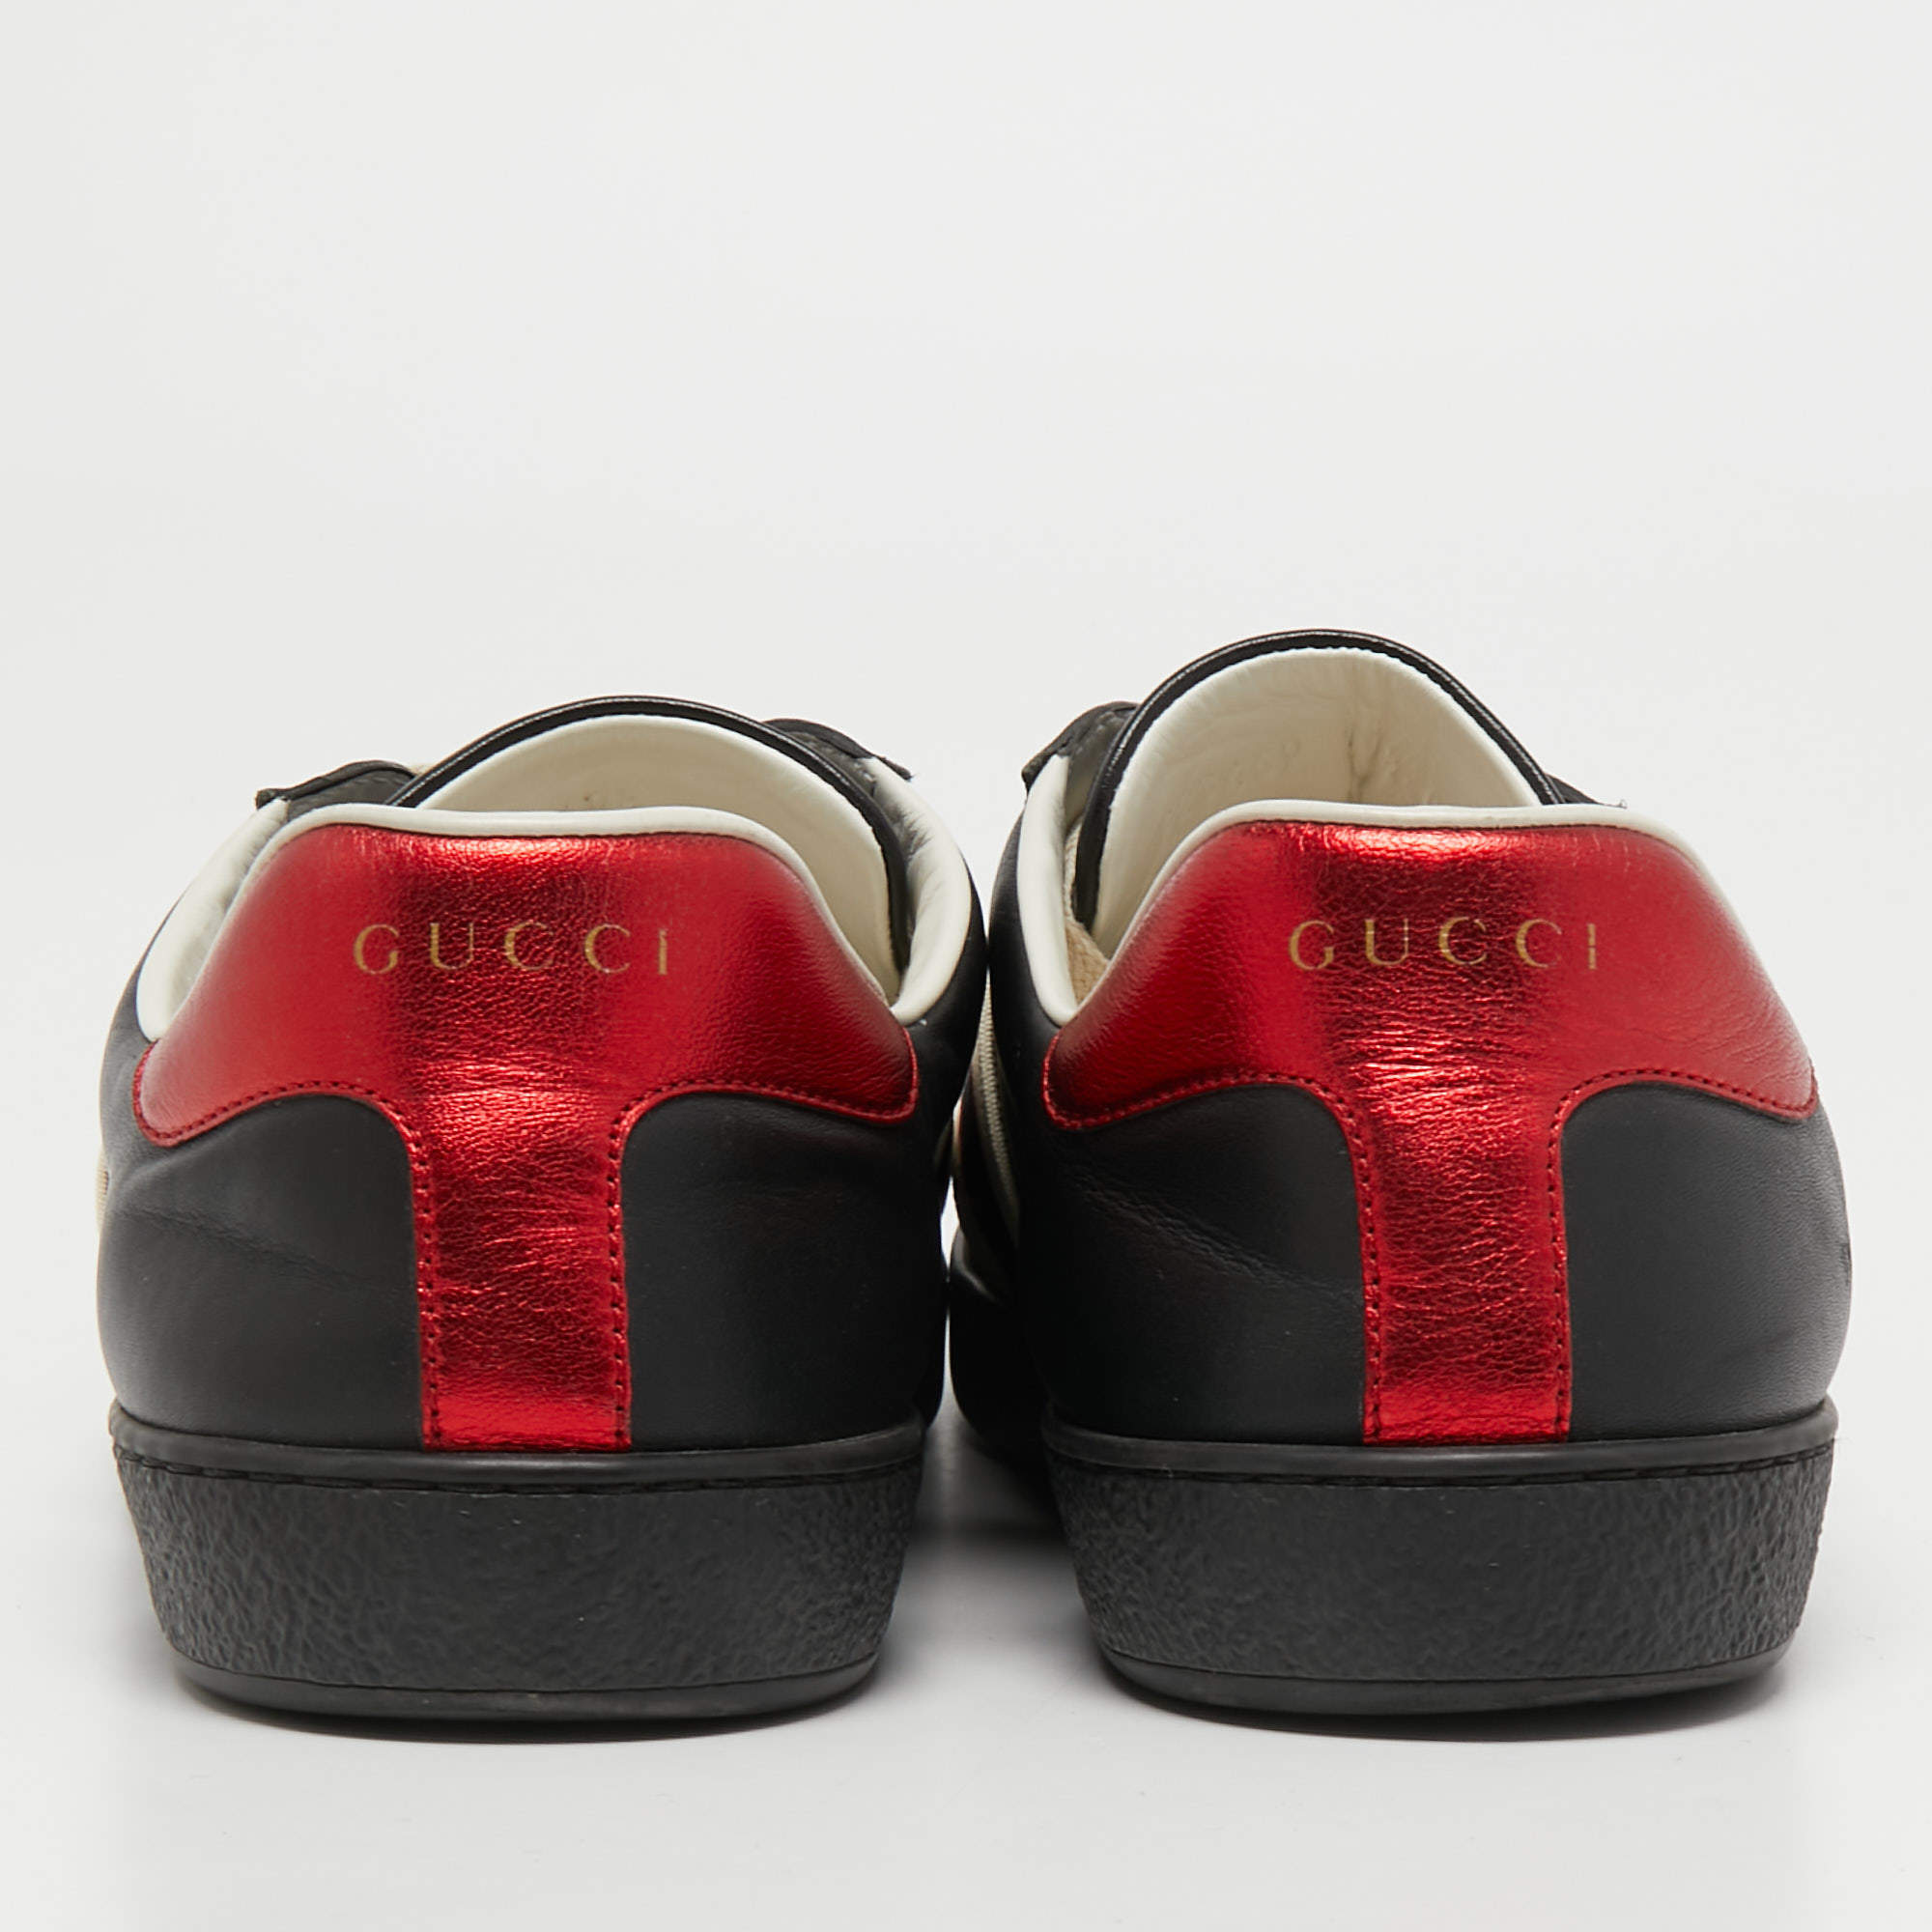 Gucci Black Leather Logo Elastic Band Ace Sneakers Size 44.5 Gucci